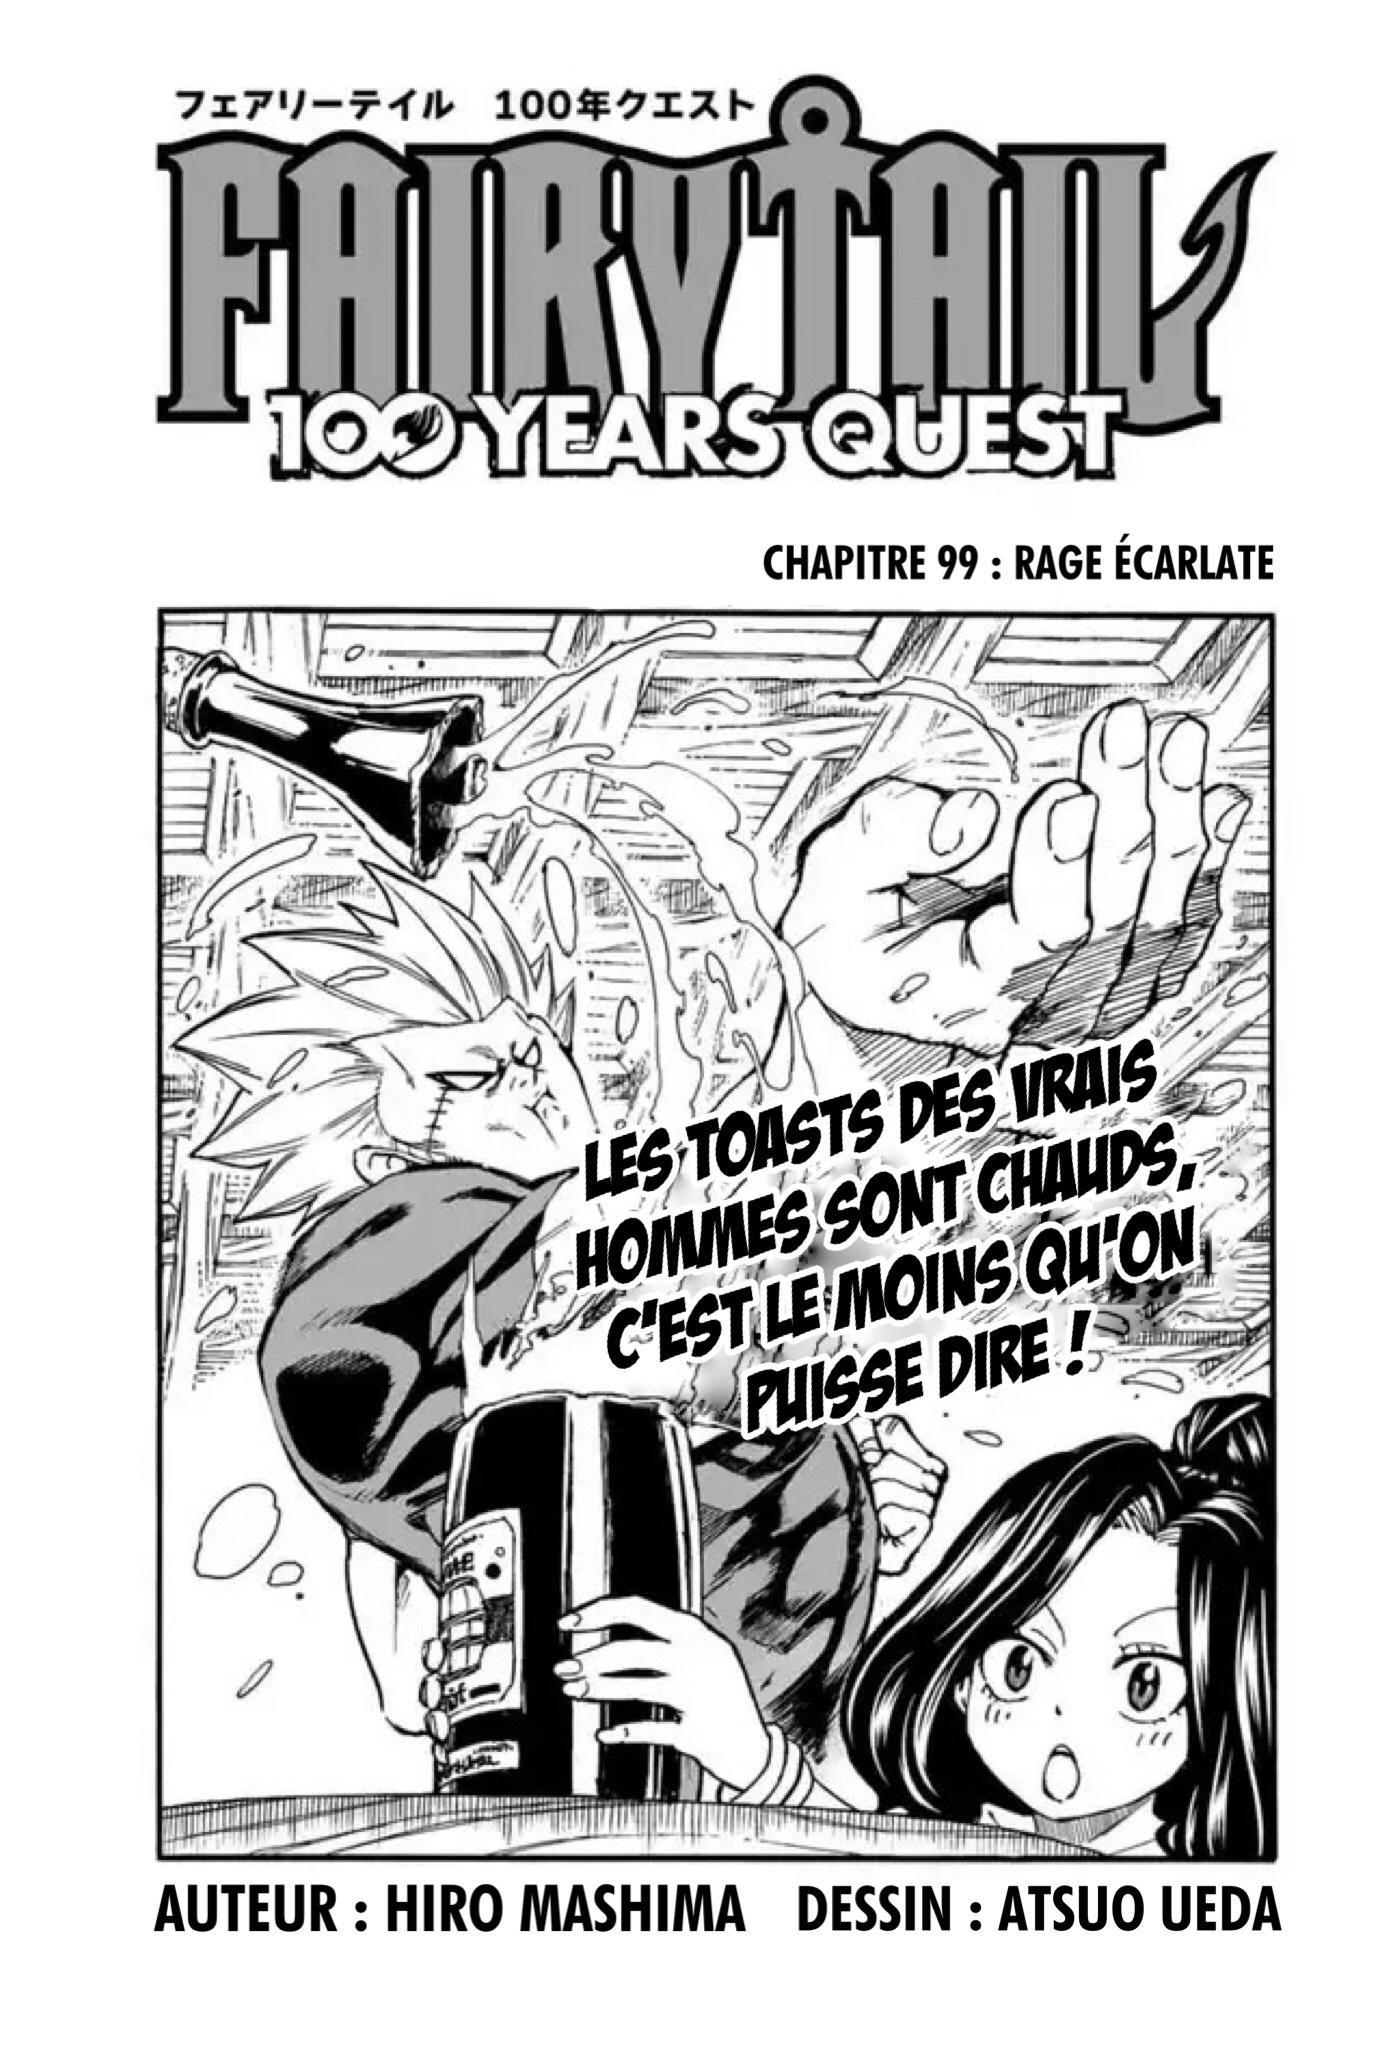 Fairy Tail 100 Years Quest: Chapter chapitre-99 - Page 1